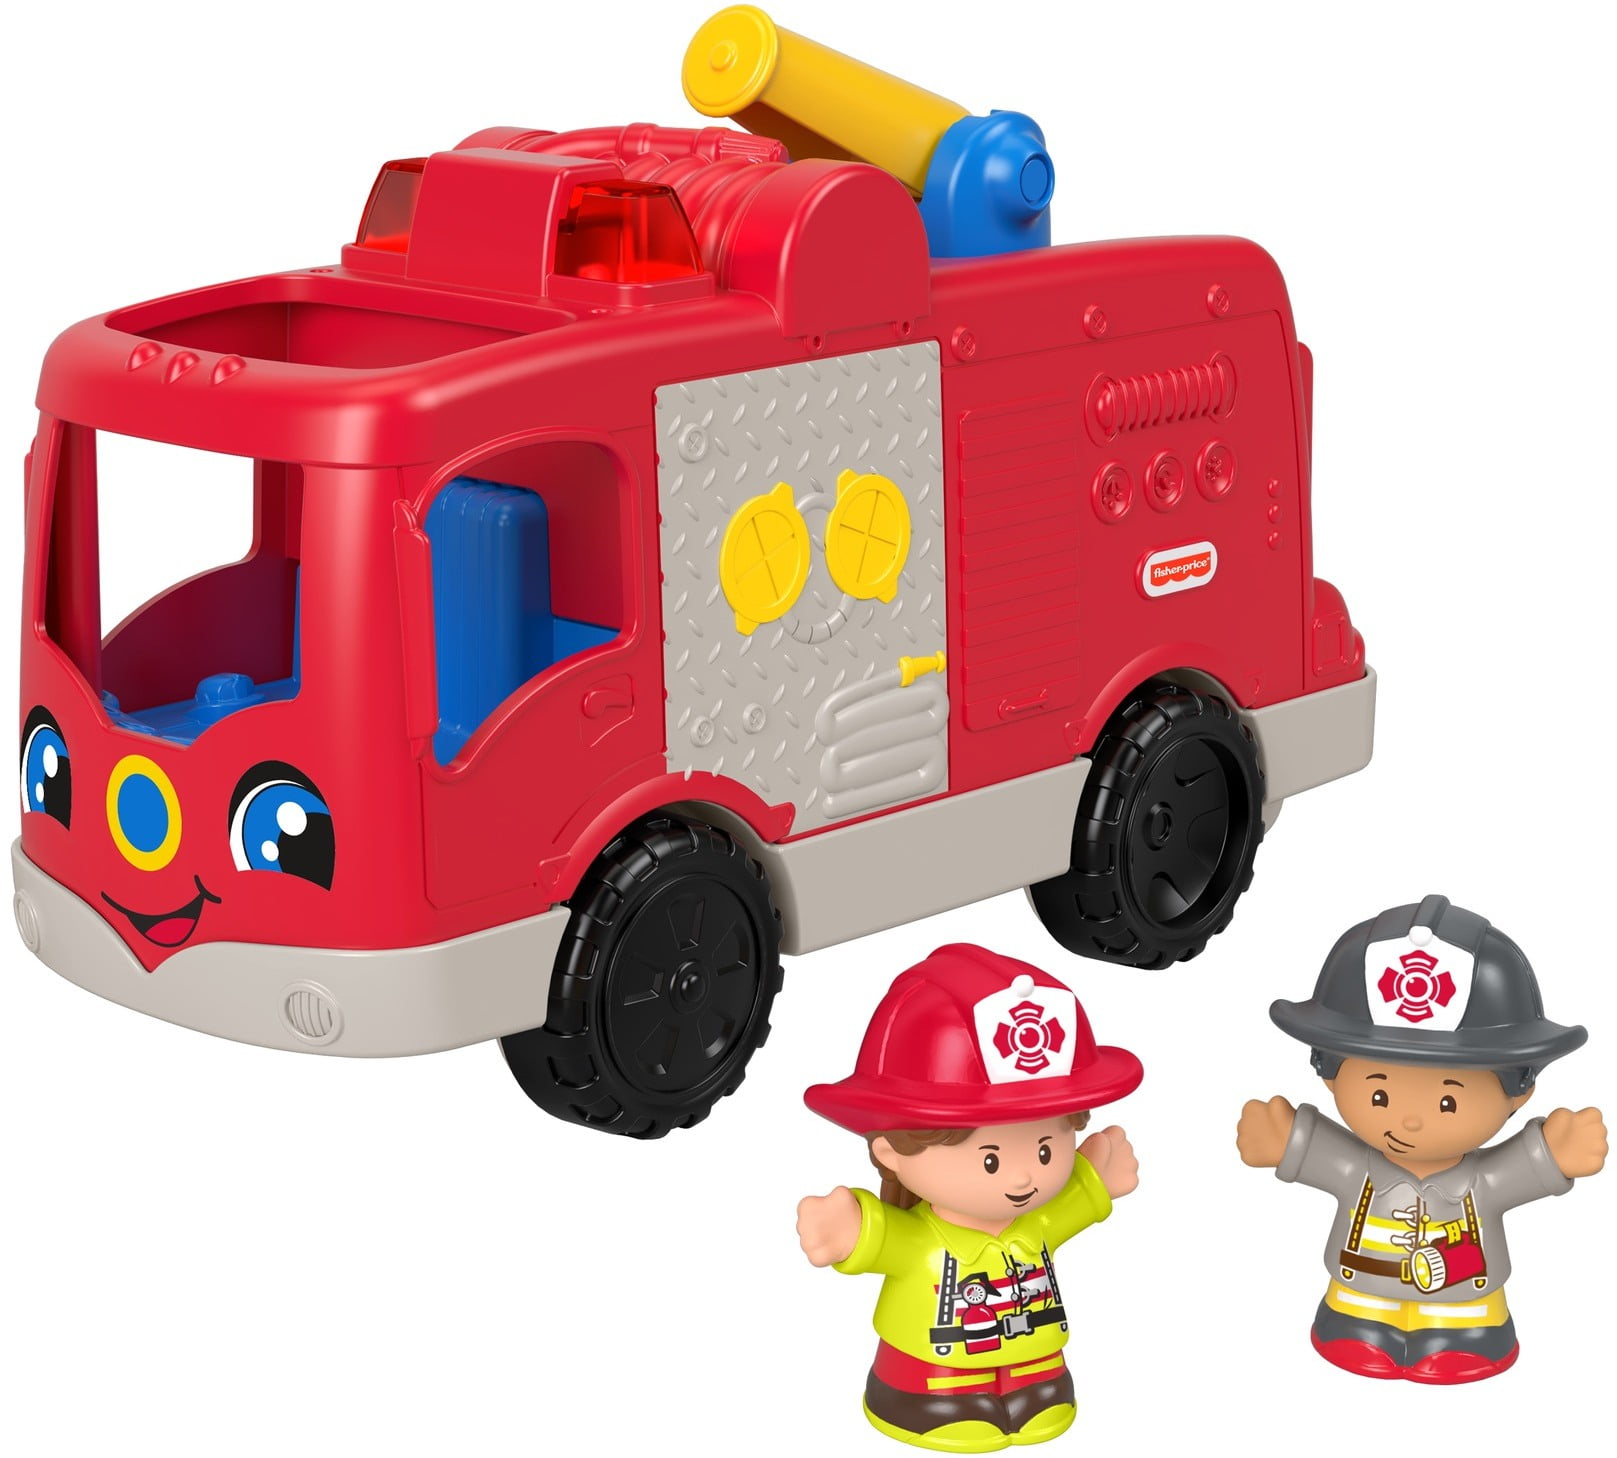 Handcrafted Building Blocks Fire Engine Car Kids Early Development Toy Red 